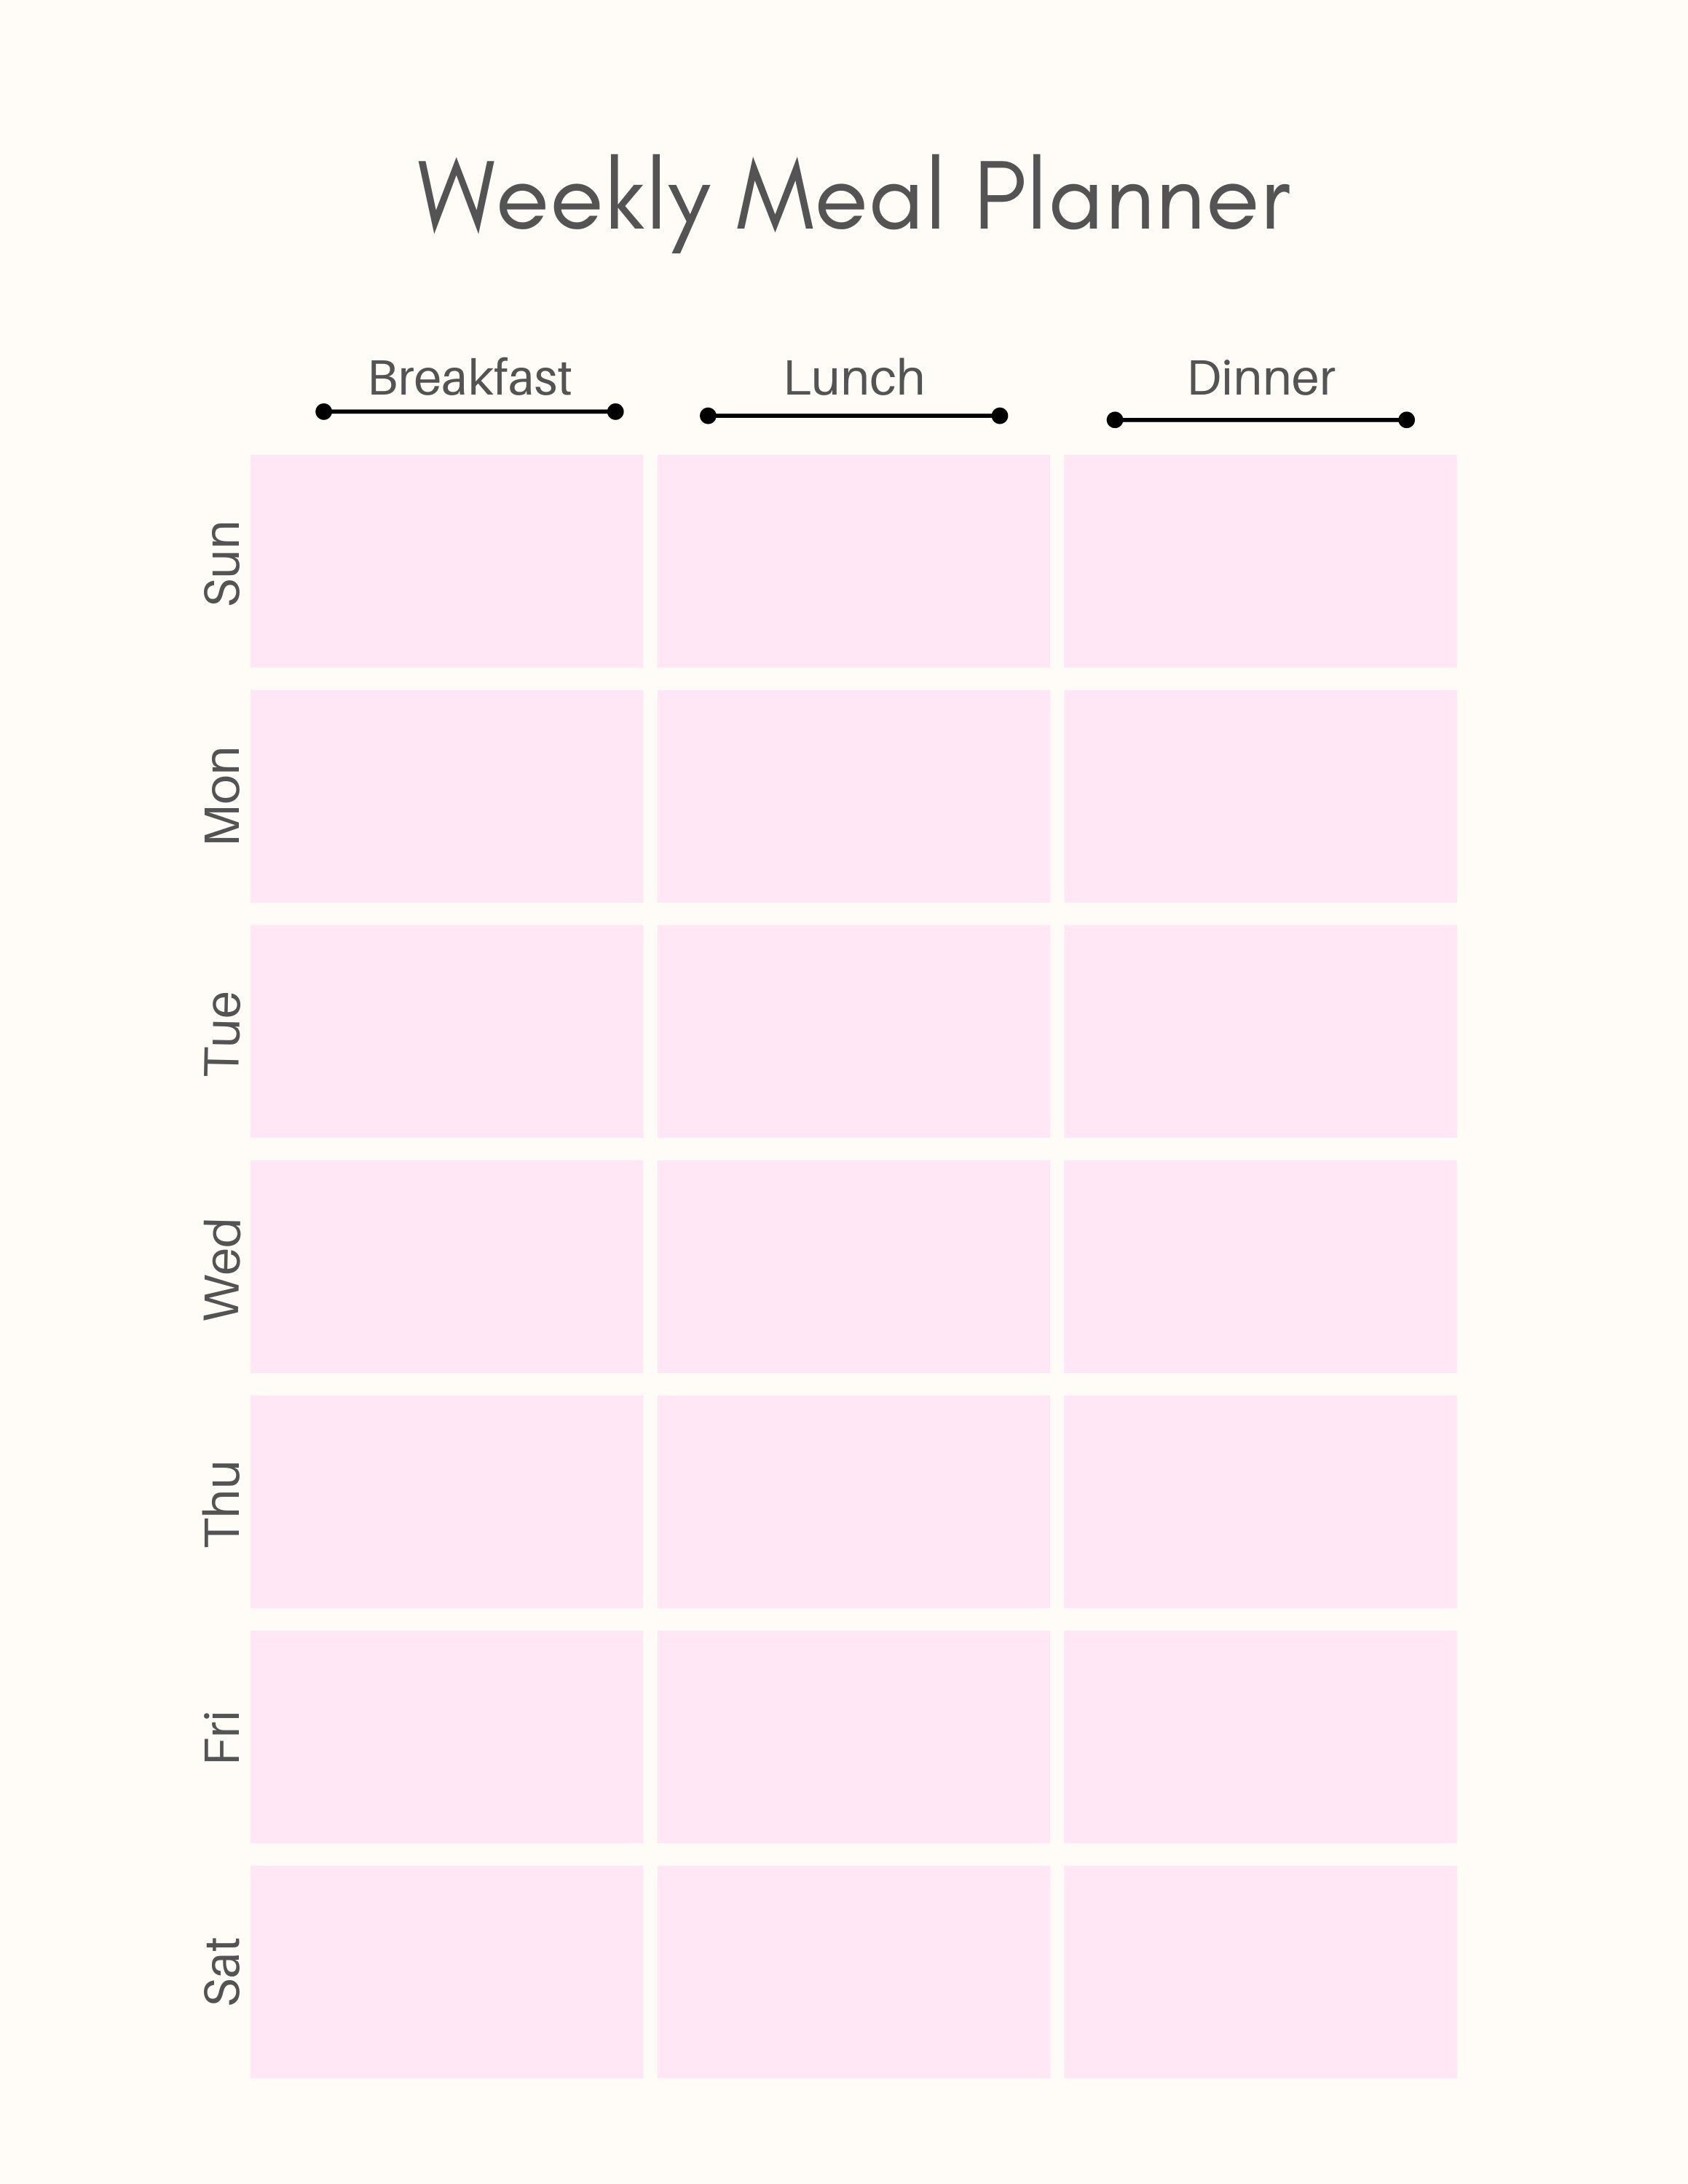 Minimalist Weekly Meal Planner Meal Tracker Budget Meal - Etsy